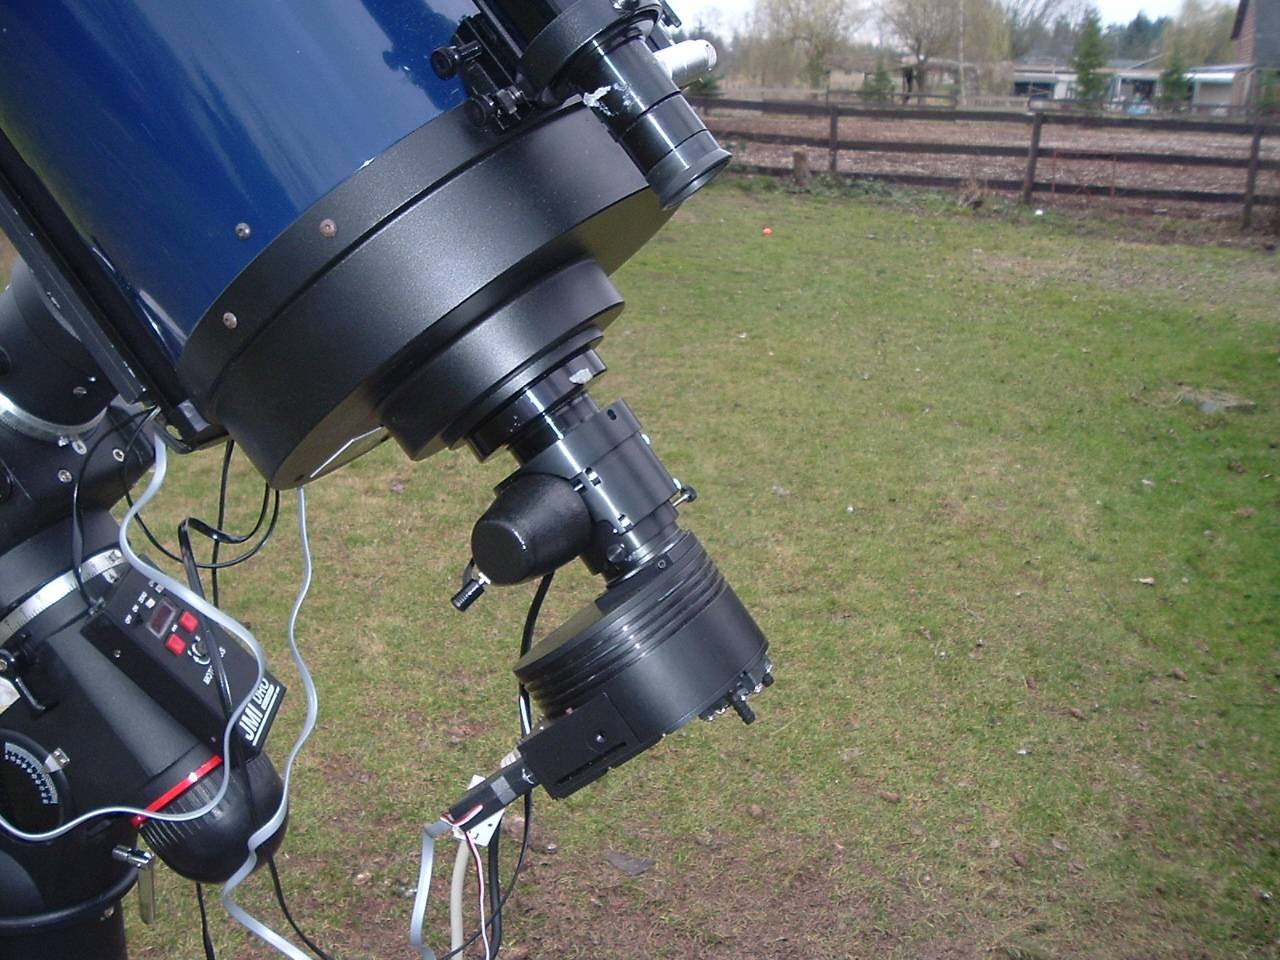 another view of the JMI focuser attached directly to the OTA using the R/C body.